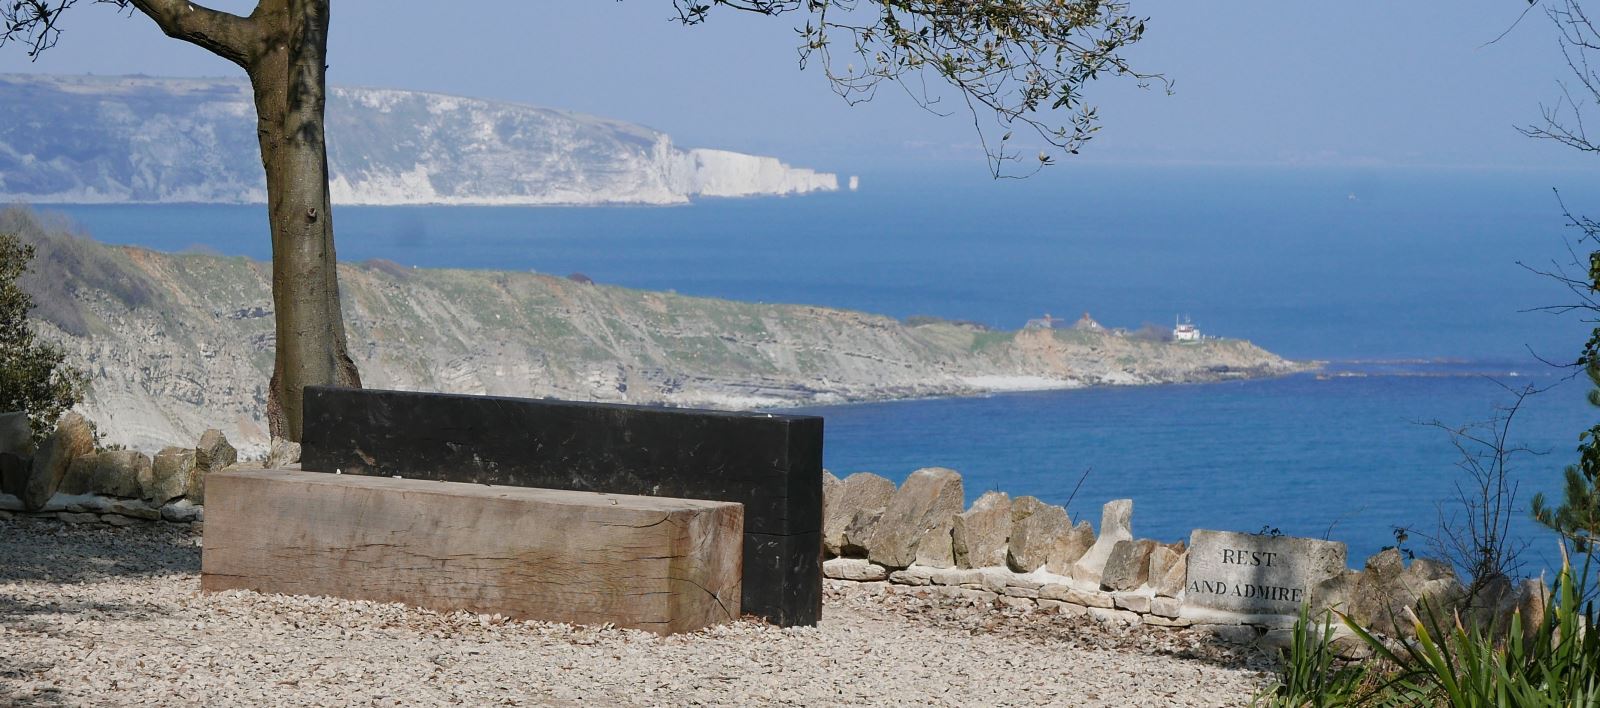 A coastal view of two headlands Peveril Point and Ballard Down. Framed in the foreground by a tree wooden seat and a dry stone wall.